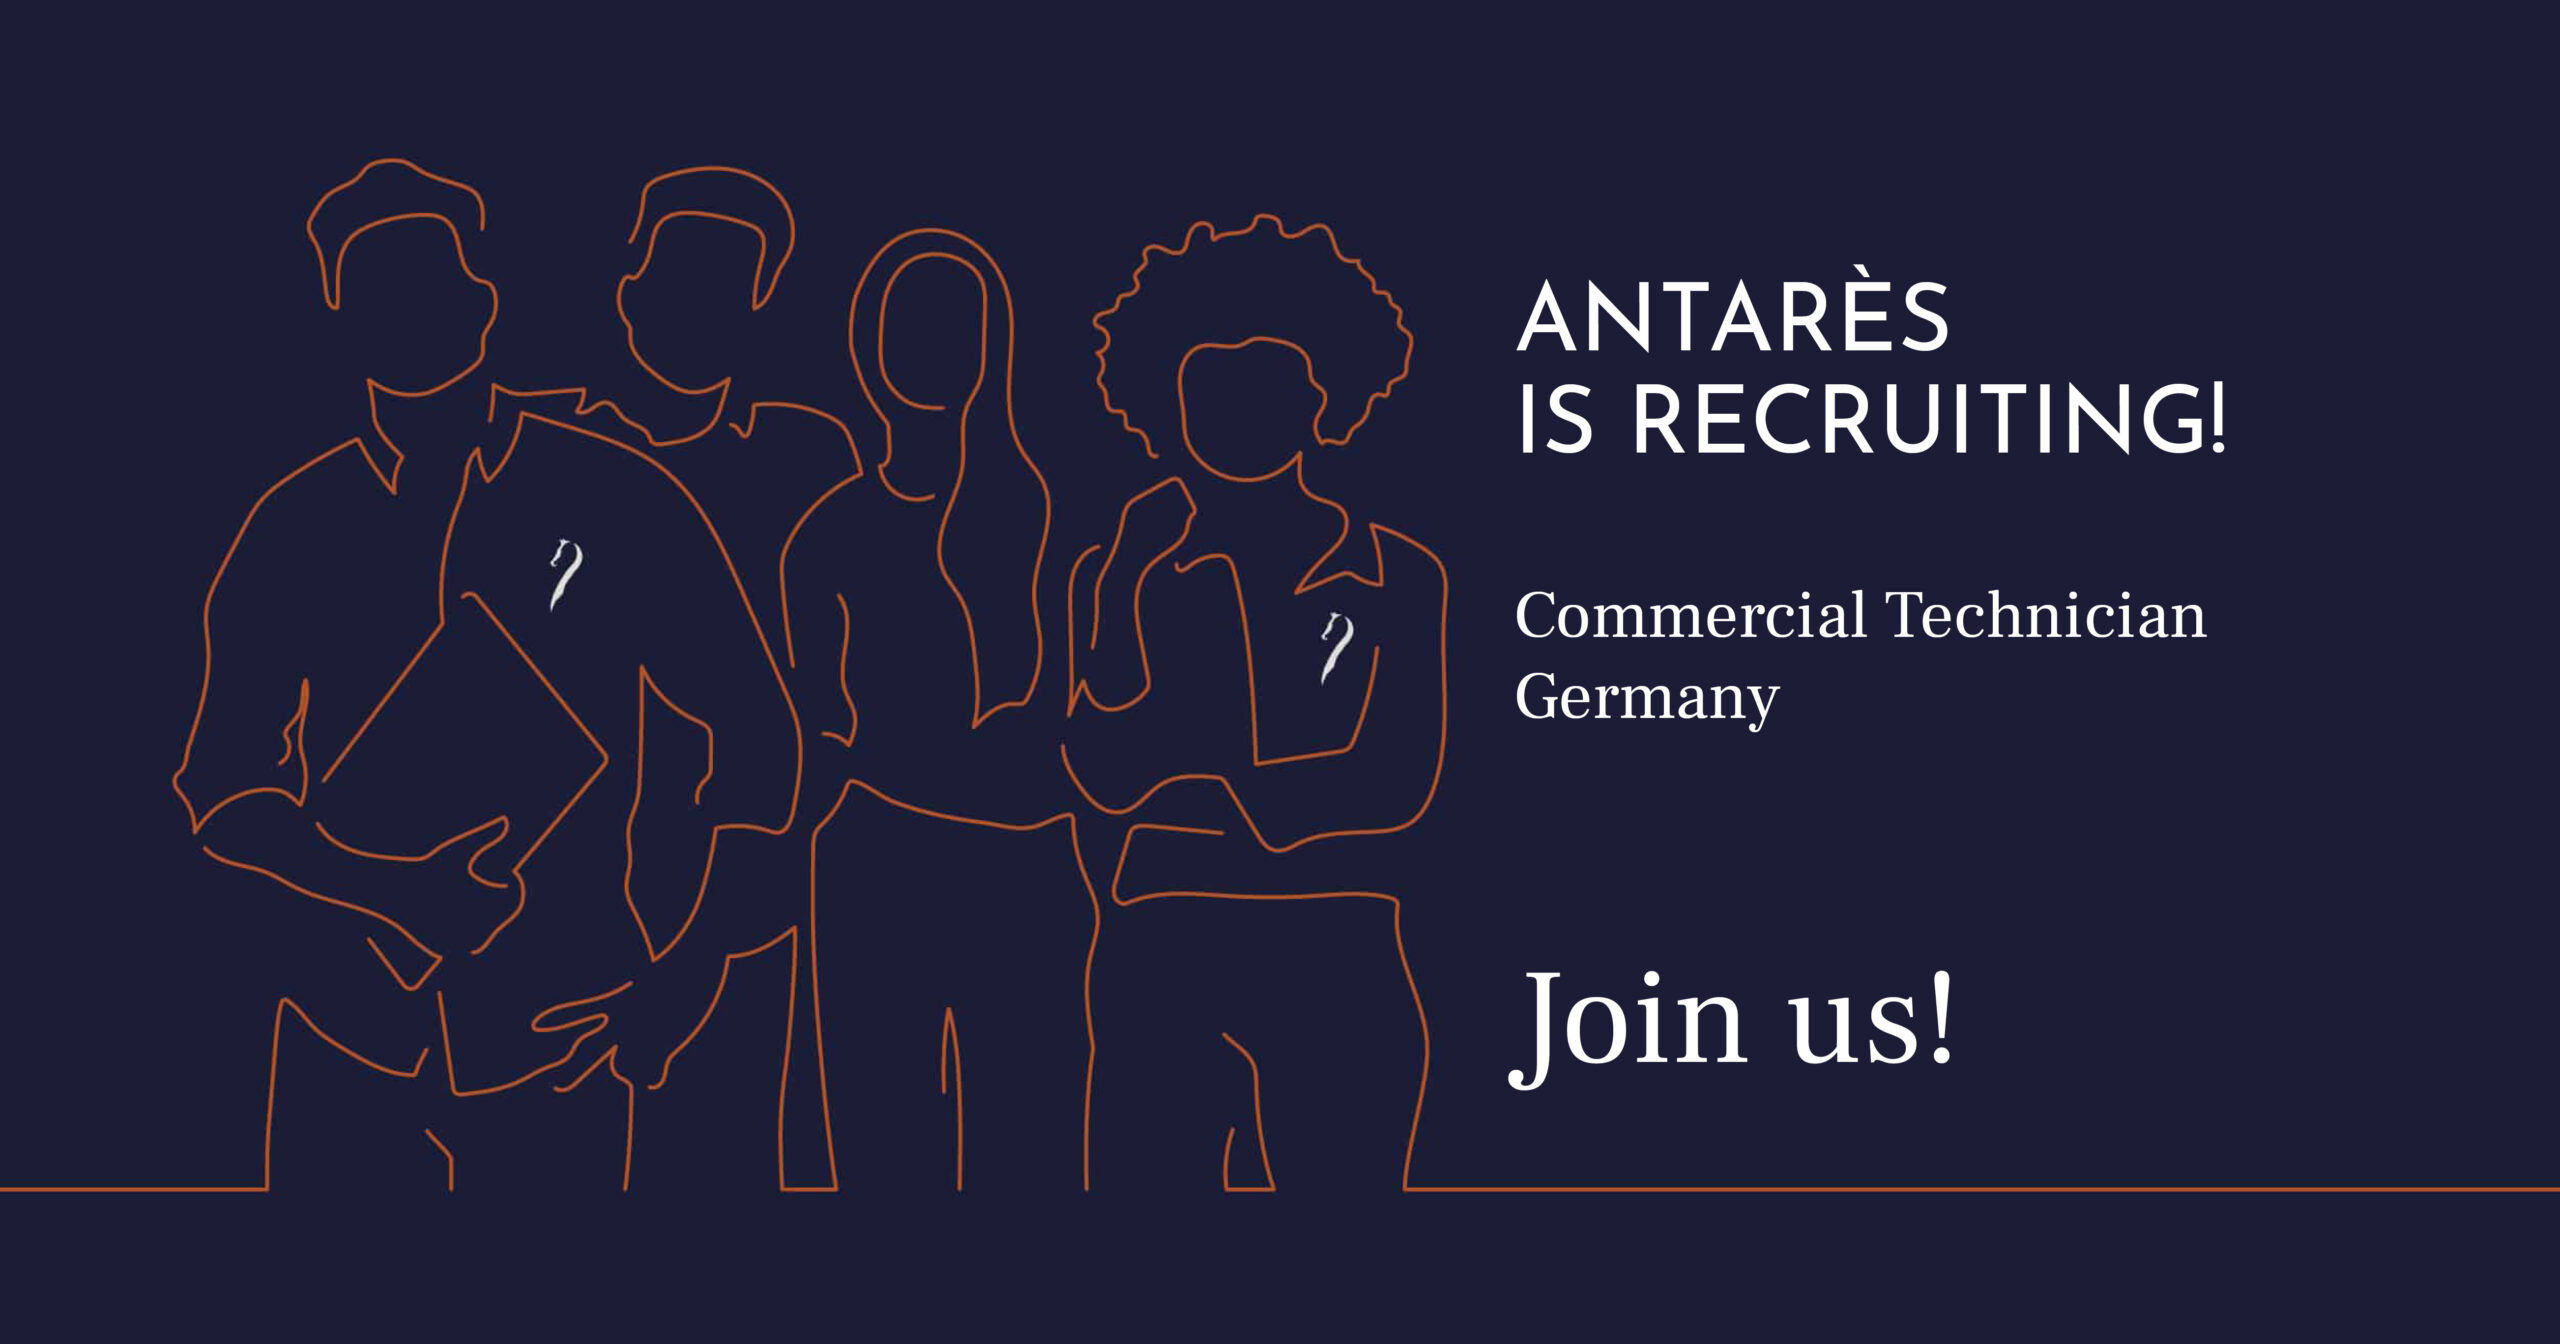 Antarès is growing: we are opening our recruitment and are looking for a cmmercial technician in Germany. Join the team!